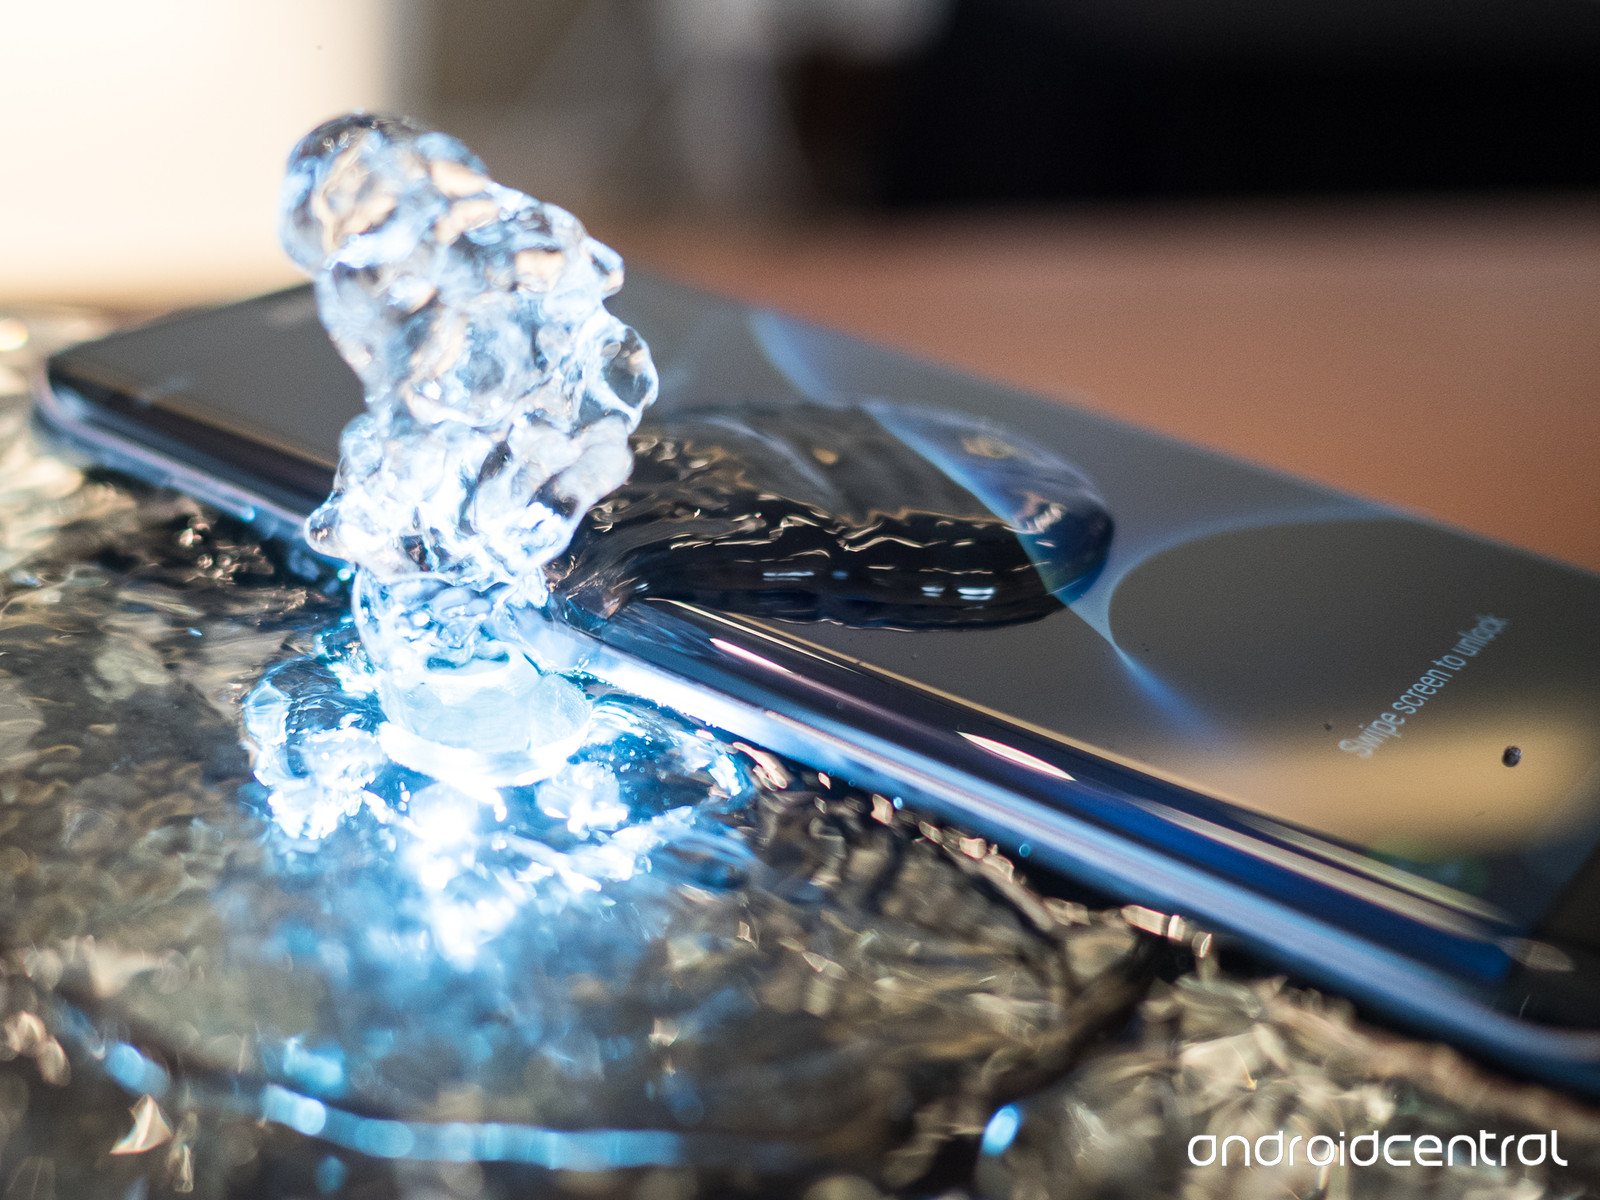 Samsung has acquired a new technology which will allow S9 to repel water!